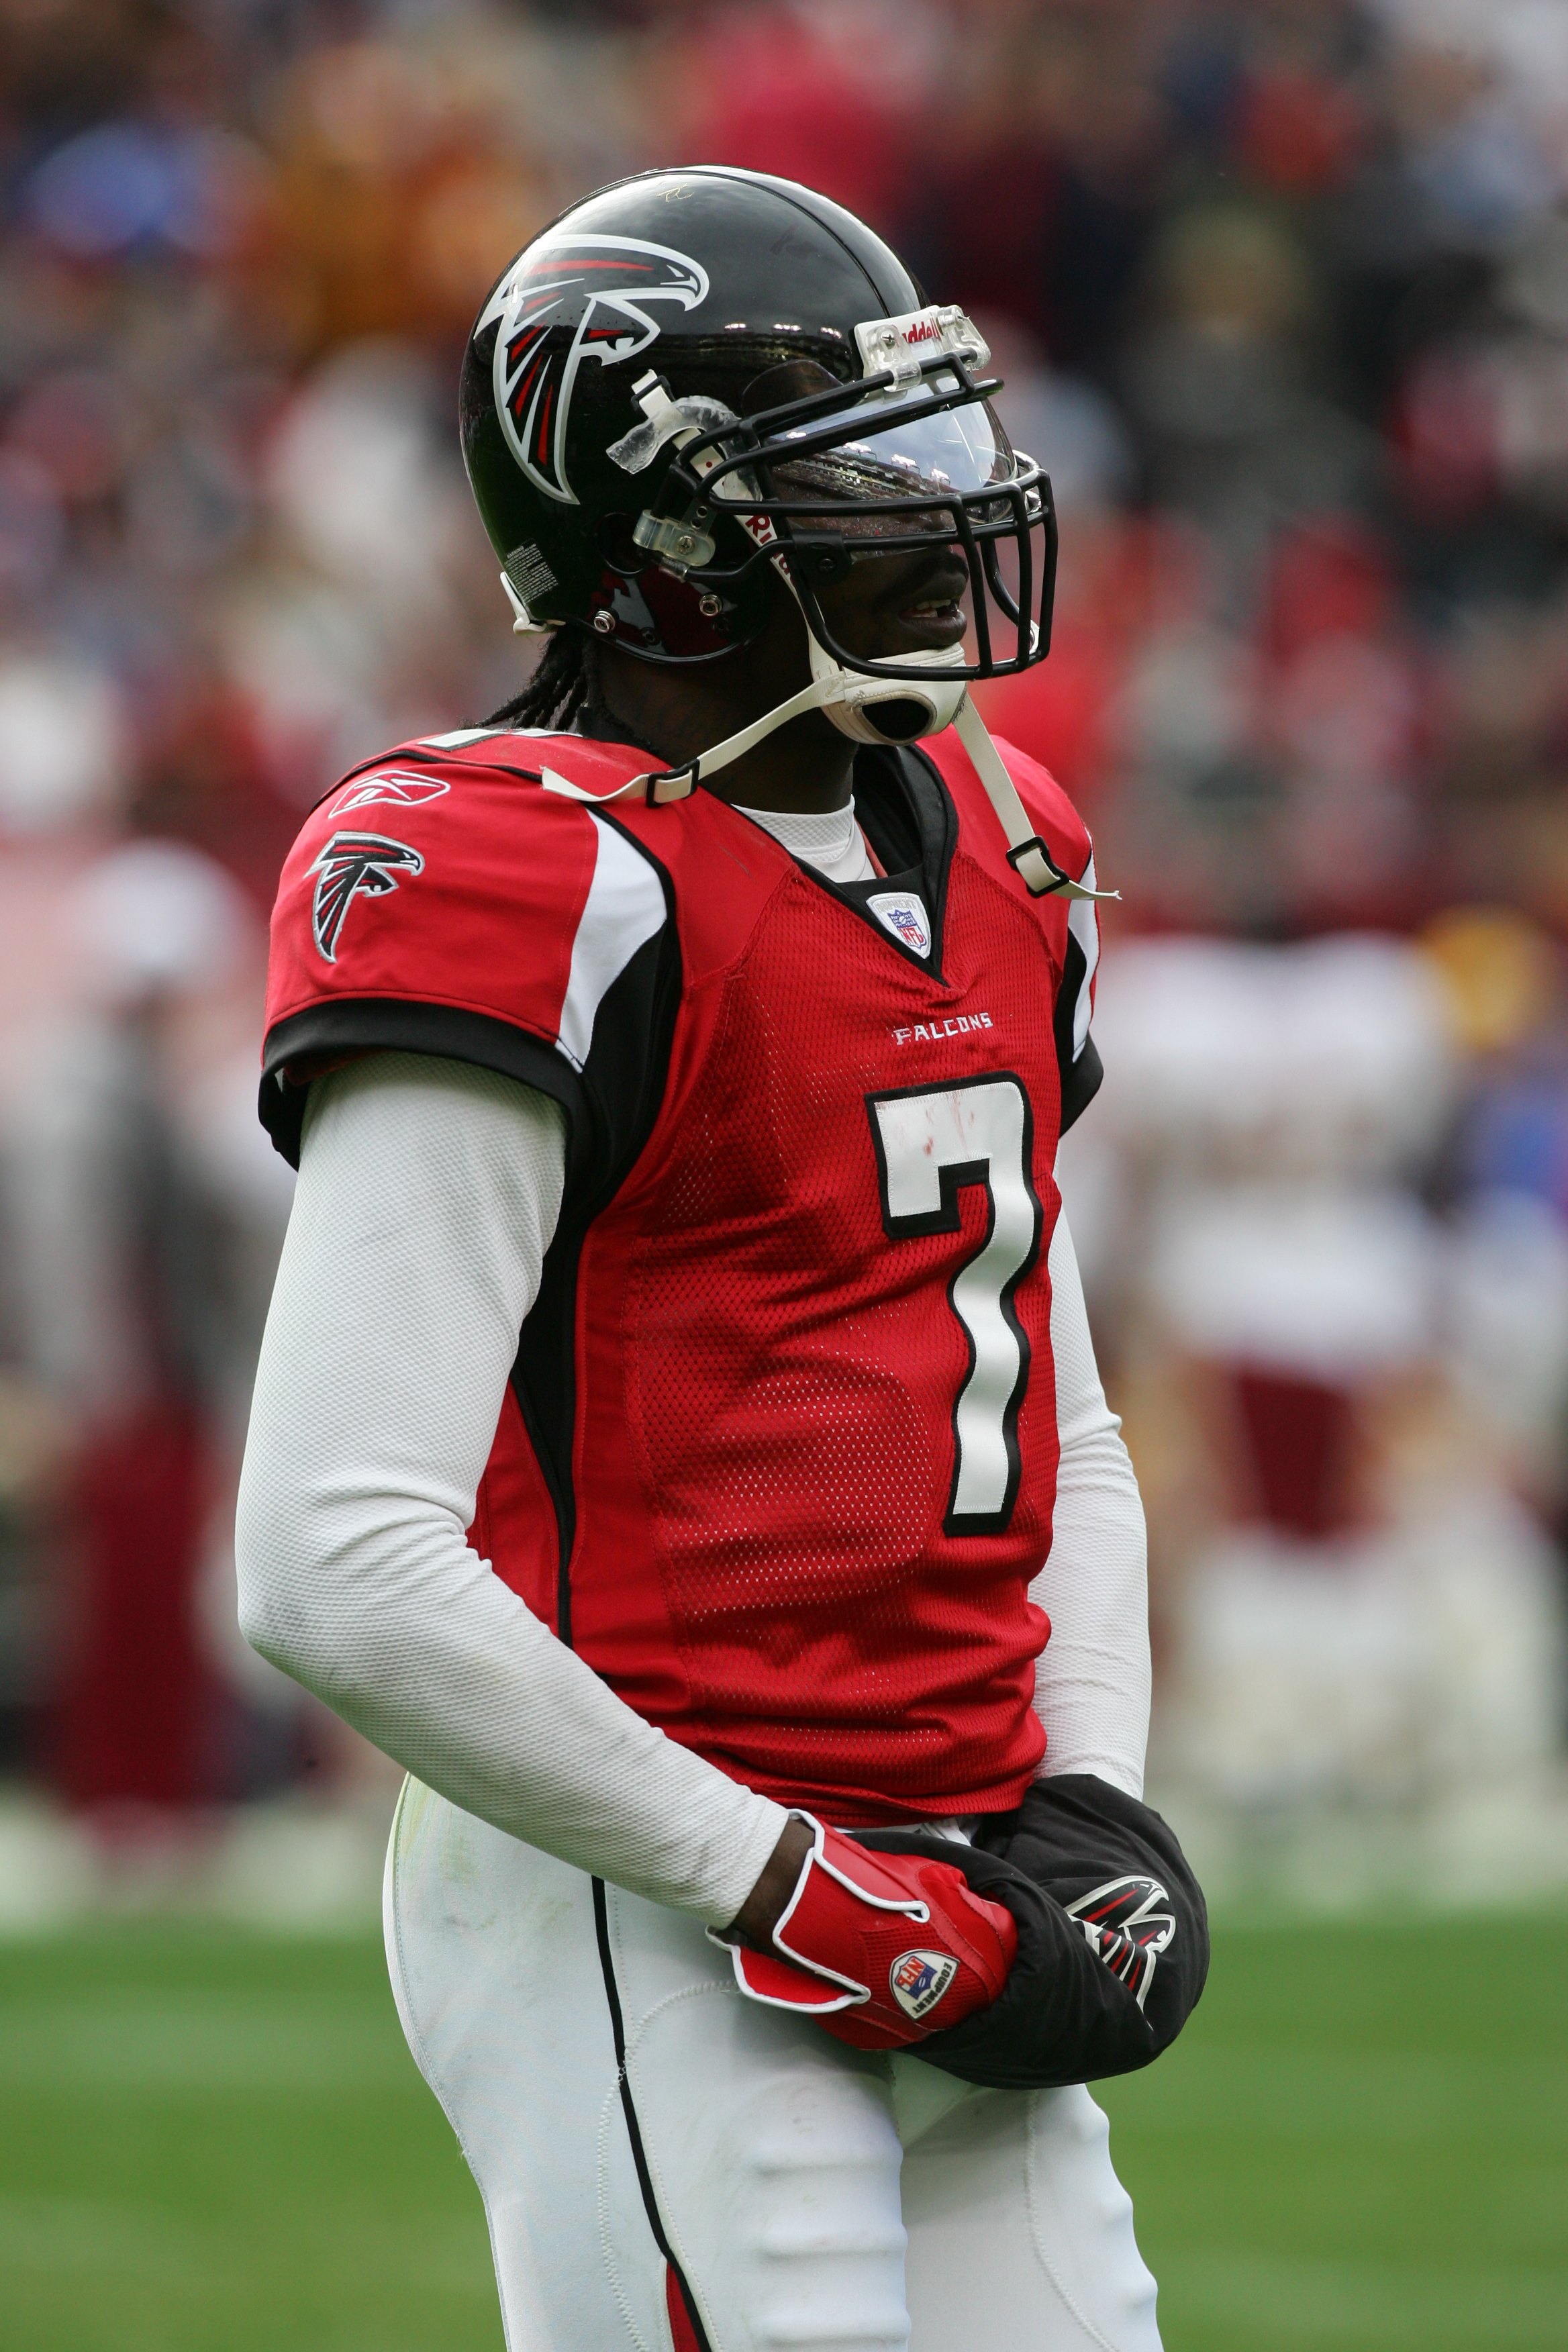 Michael Vick on X: Feels like yesterday. I played ATLiens on